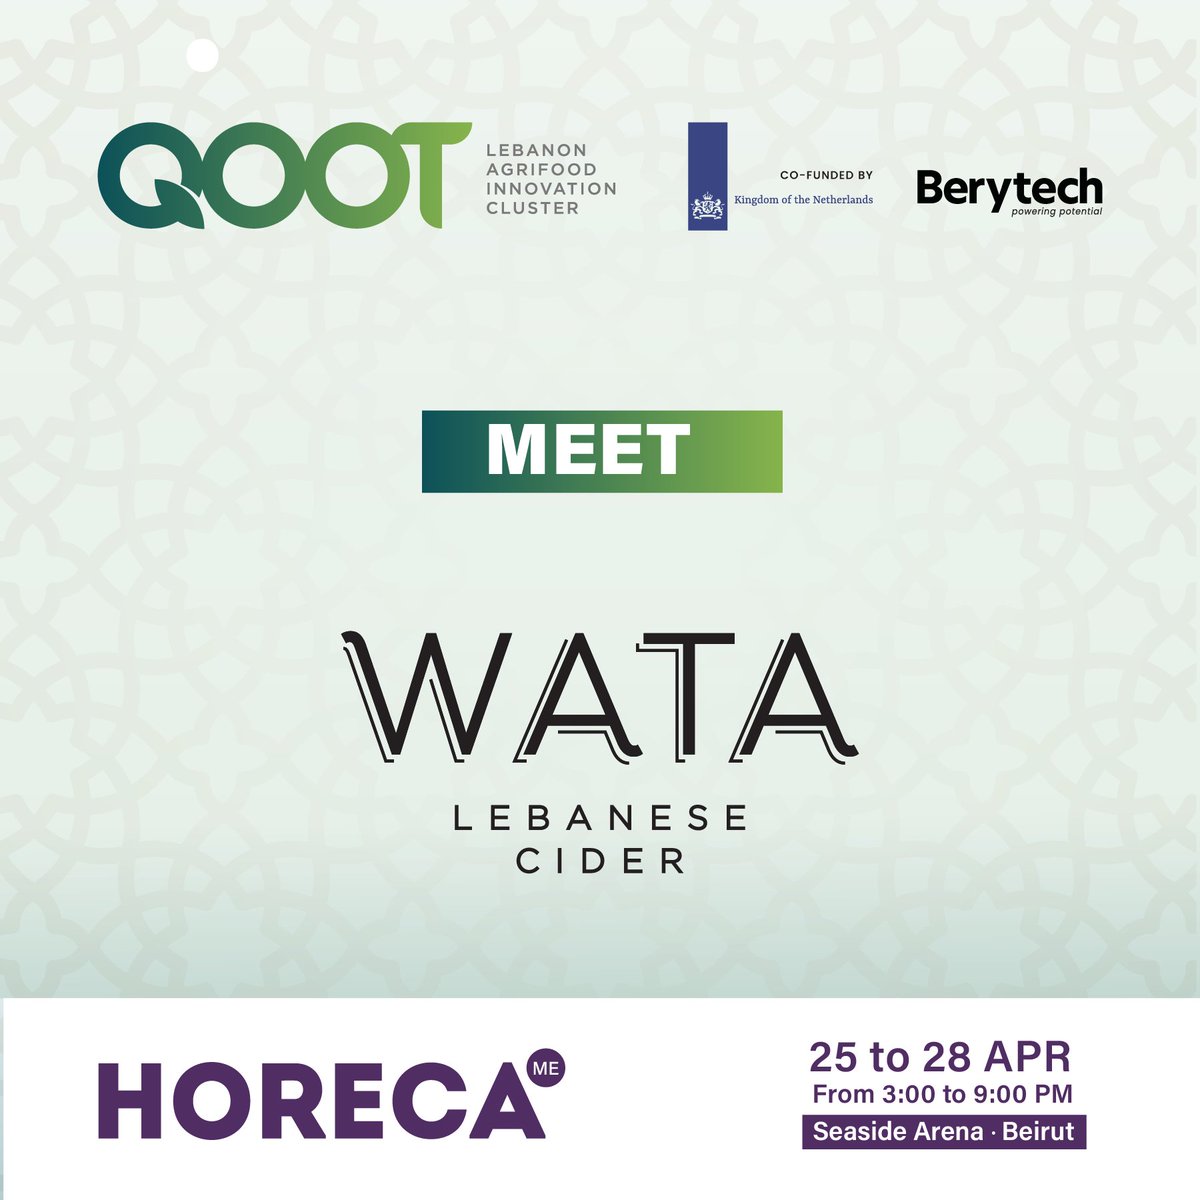 Pass by the QOOT Cluster’s booth at the HORECA exhibition to meet our member WATA Cider and discover their products. 
Book your calendars and join us April 25 – 28 from 3 to 9 pm at the Seaside Arena, Beirut.

qoot.org/qoot-cluster-s…

@HorecaConnects #HORECALebanon #QOOTinHORECA